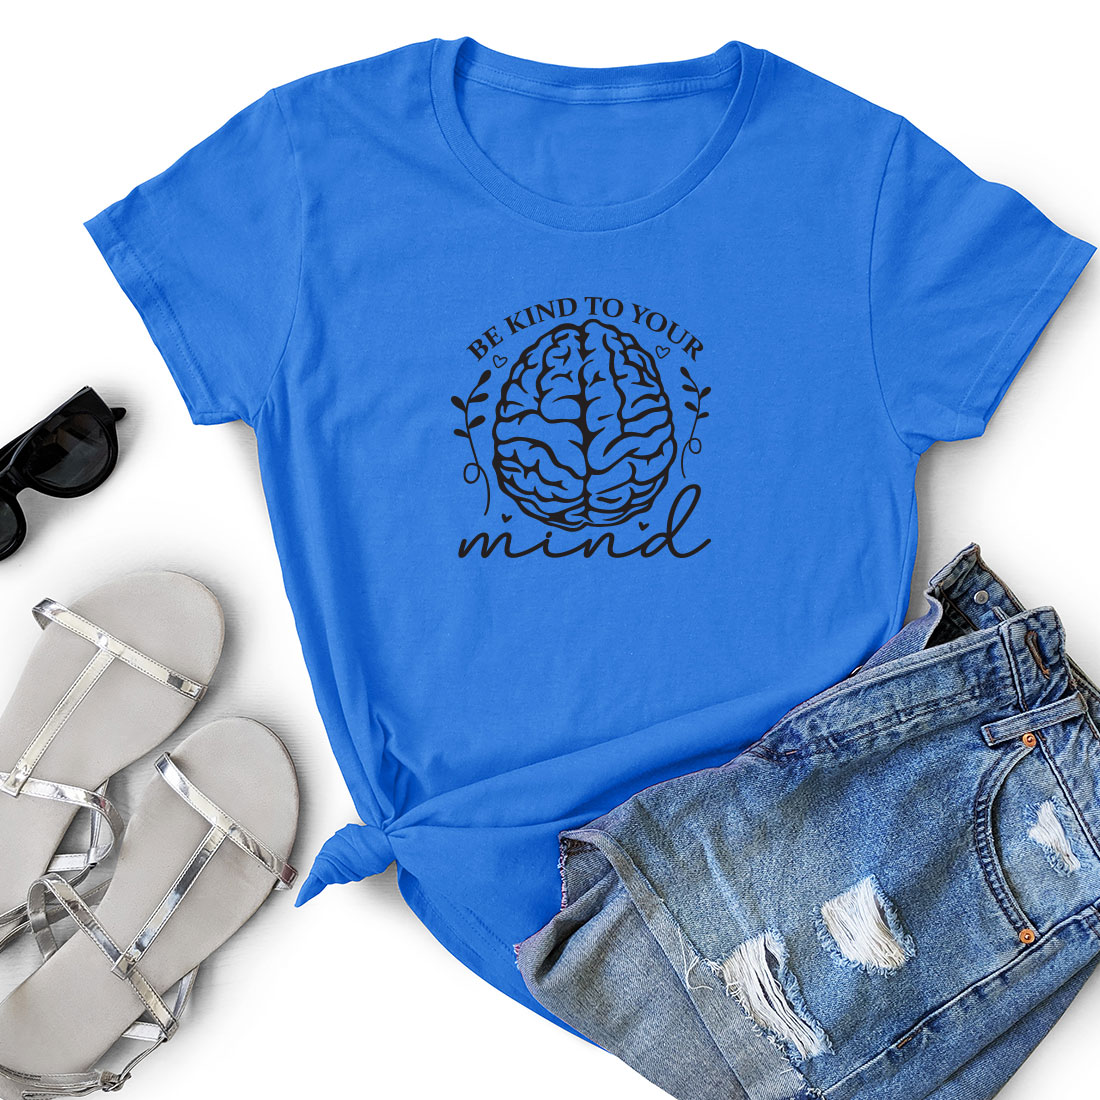 Blue t - shirt with the words behind it is a pair of shorts and.